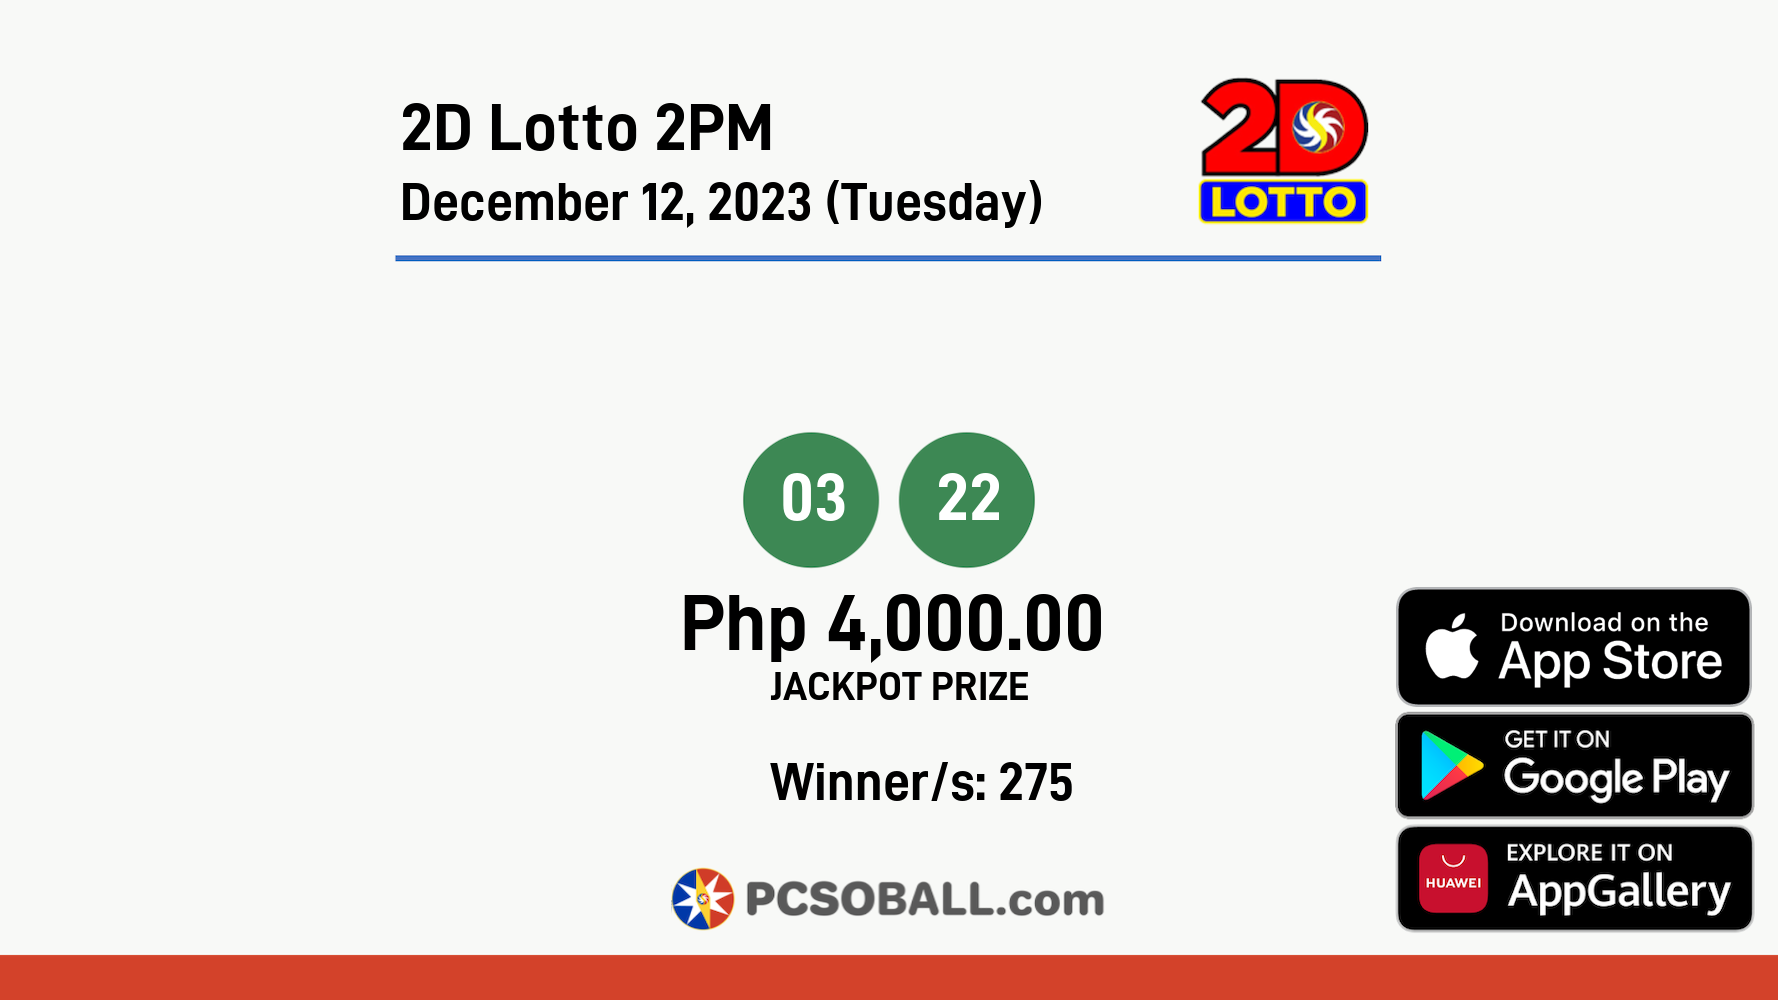 2D Lotto 2PM December 12, 2023 (Tuesday) Result